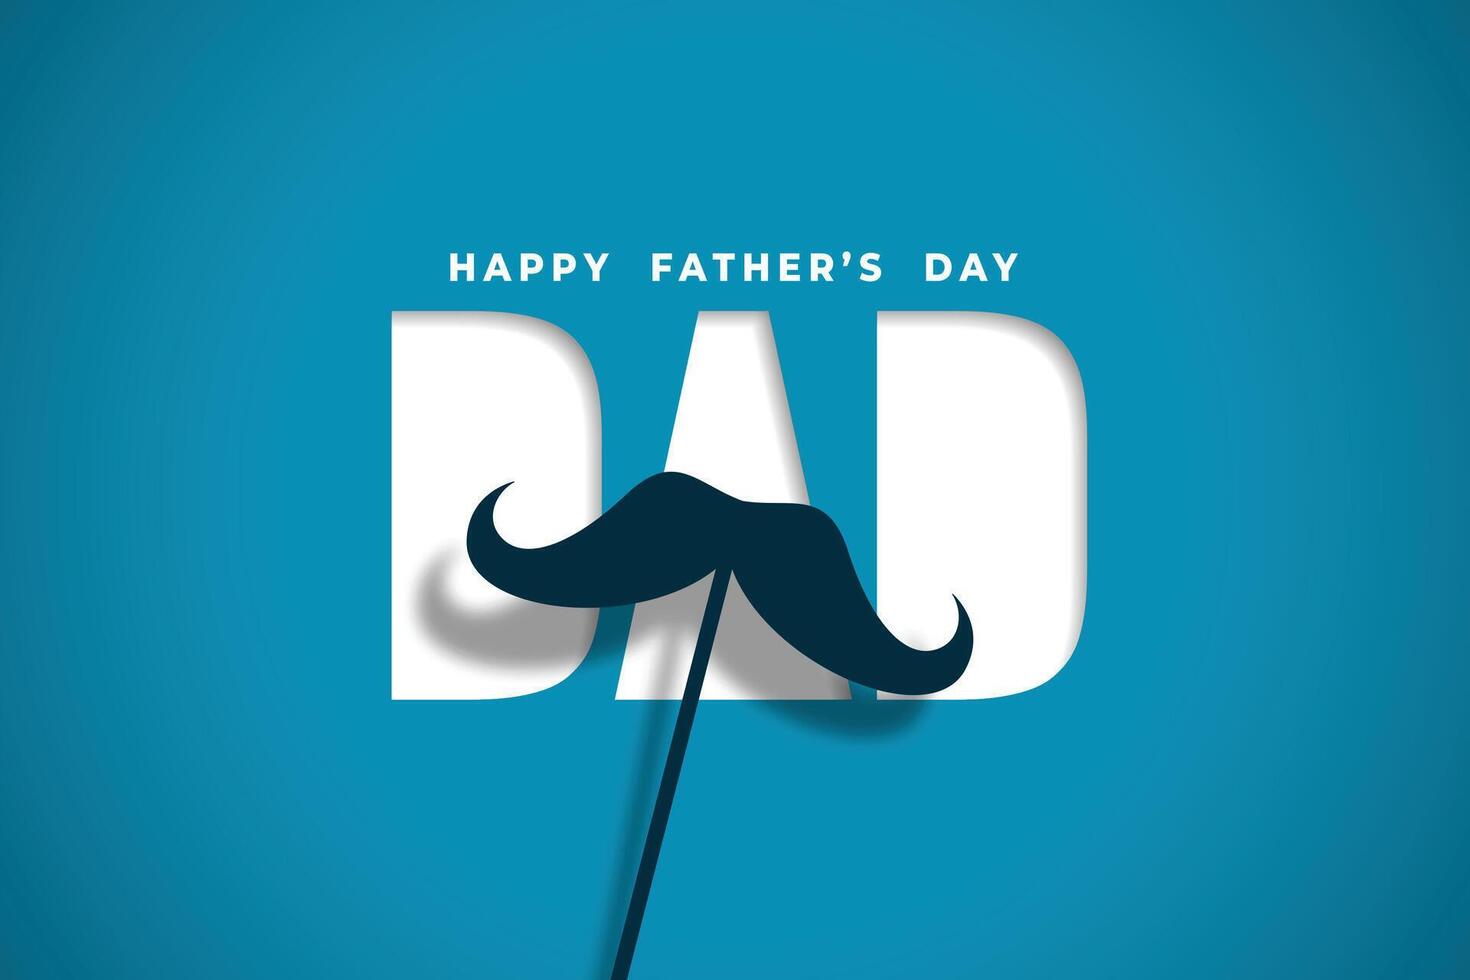 happy fathers day wishes card in papercut style design vector